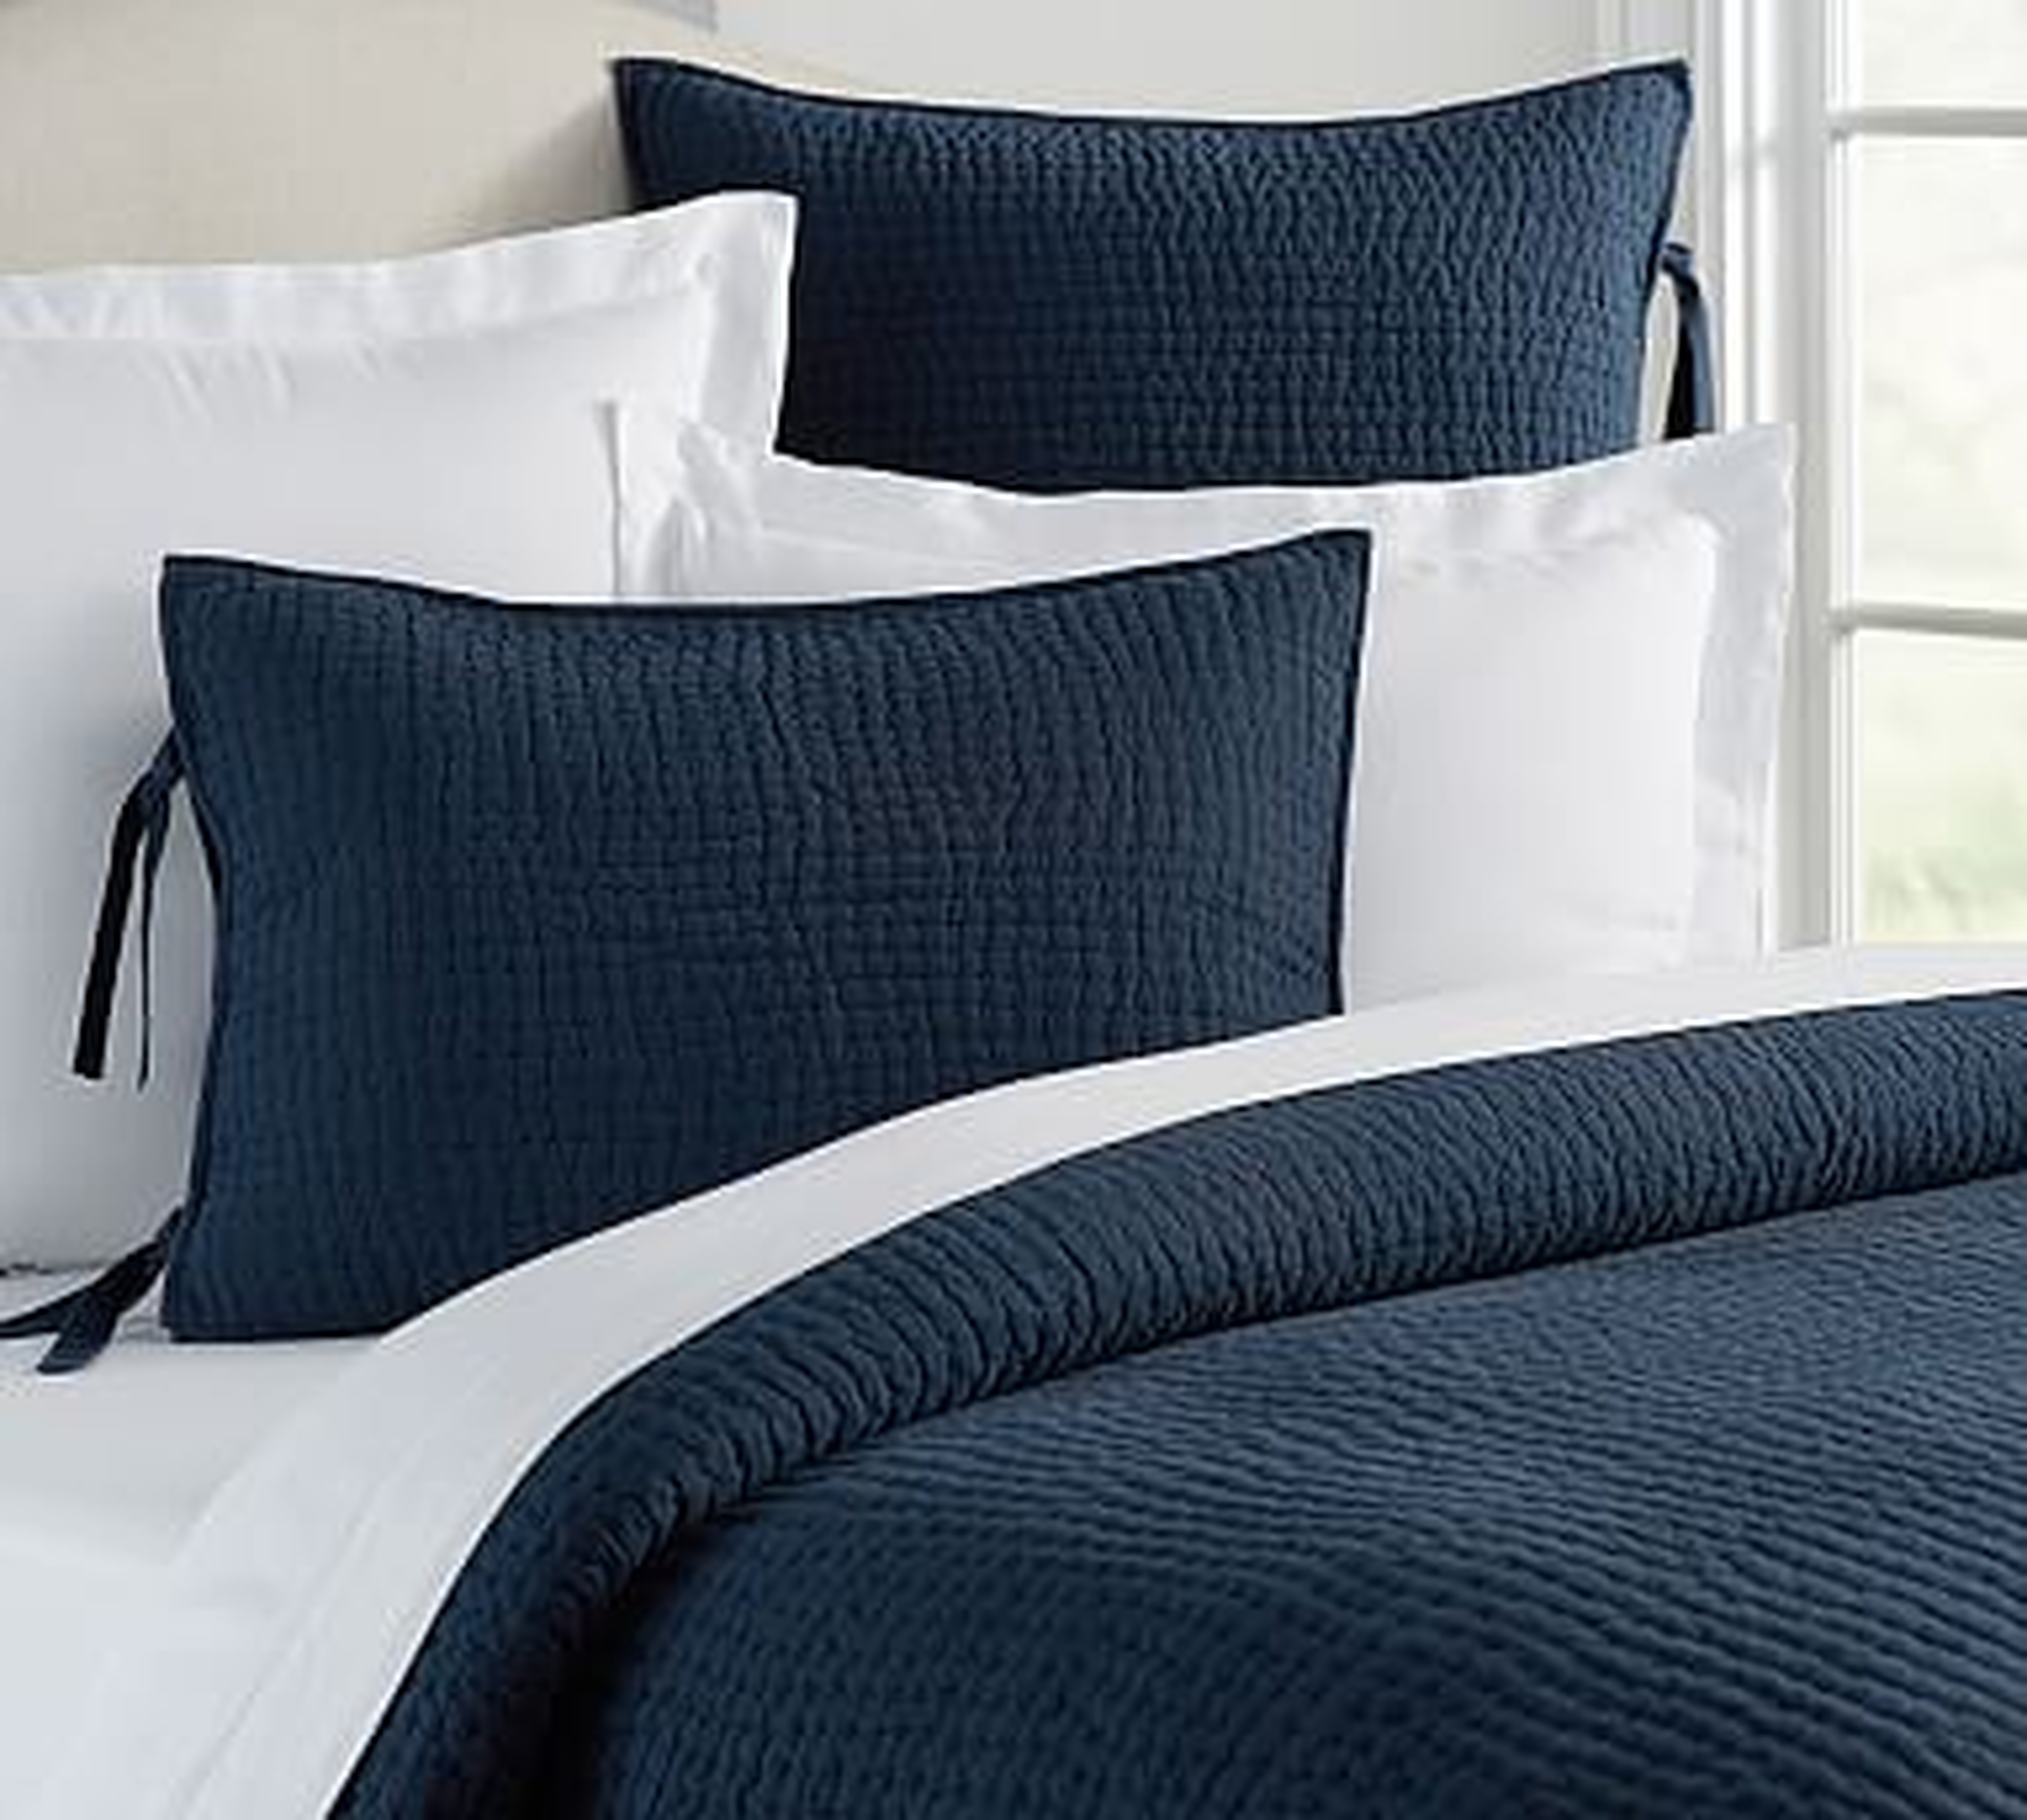 Pick-Stitch Handcrafted Cotton/Linen Quilt, Twin/Twin XL, Midnight Blue - Pottery Barn